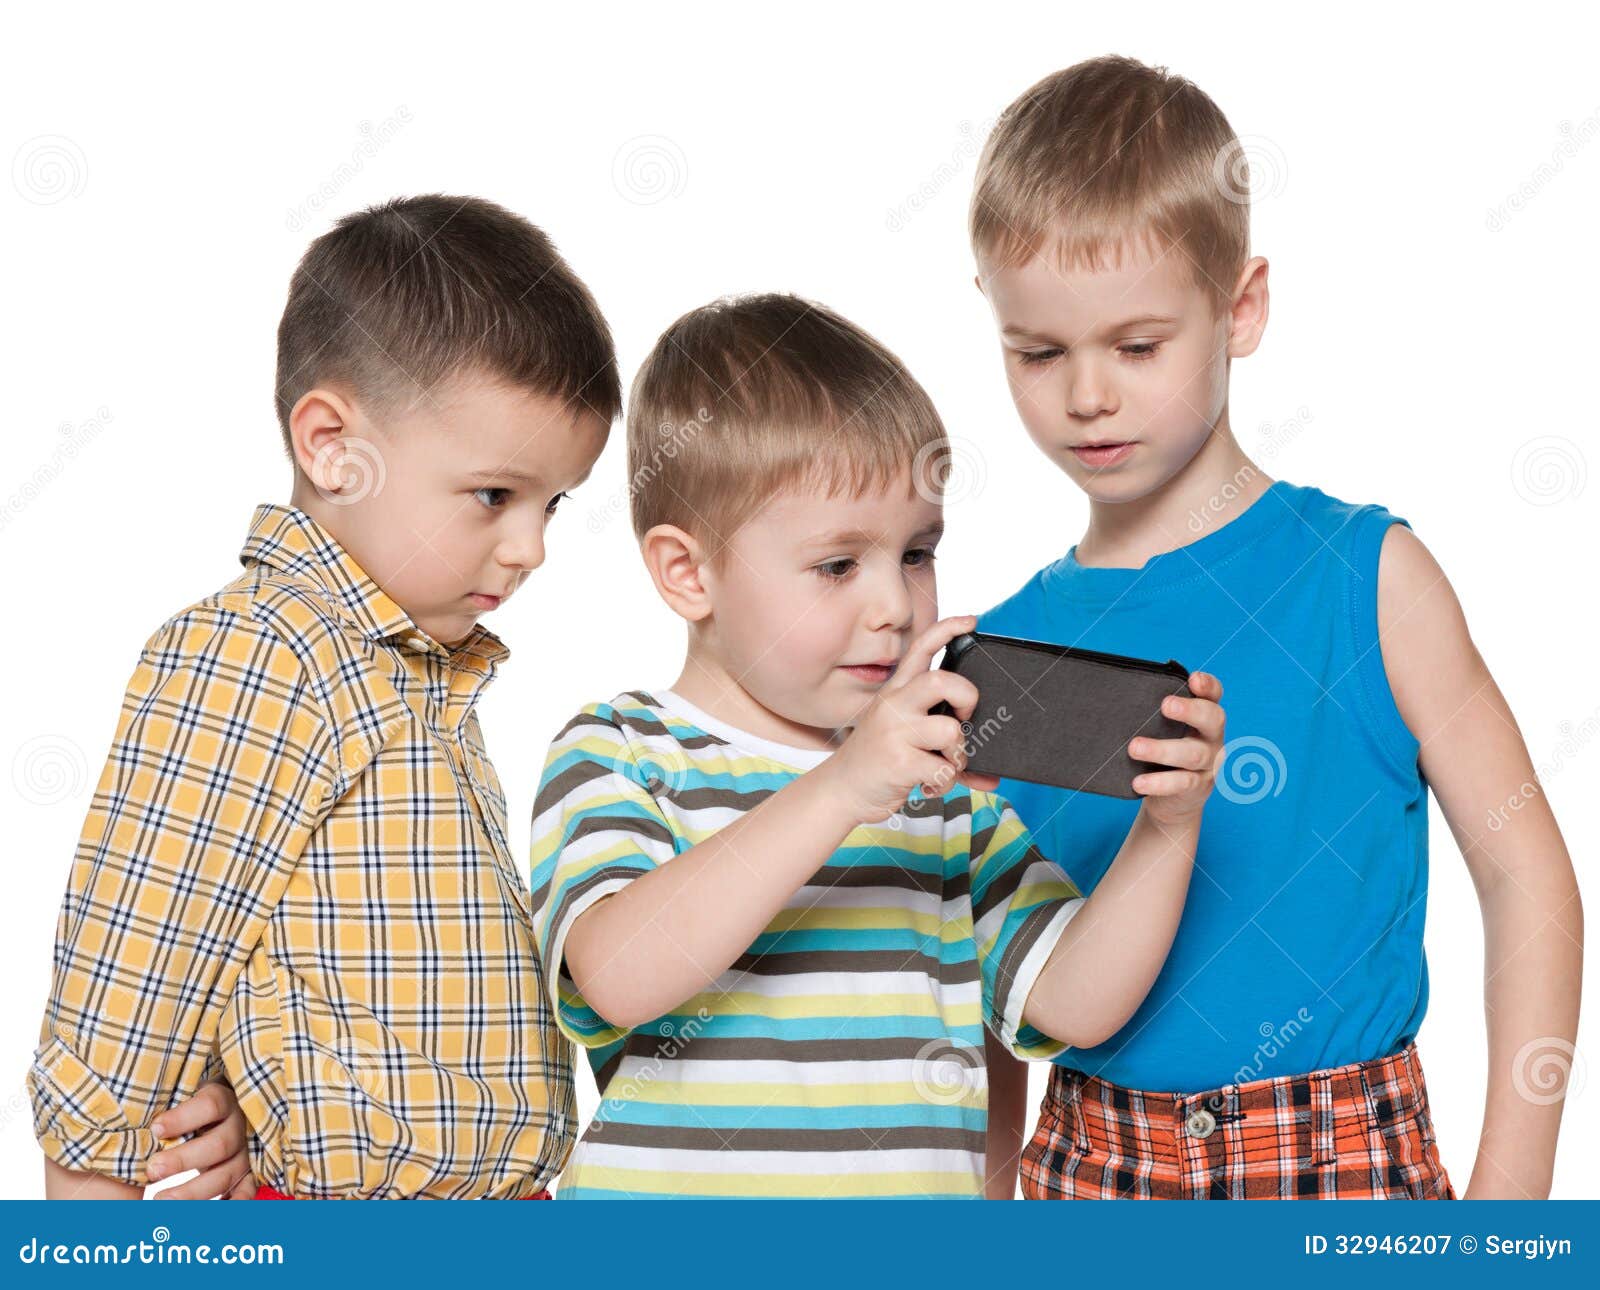 young children plaing with a new gadget